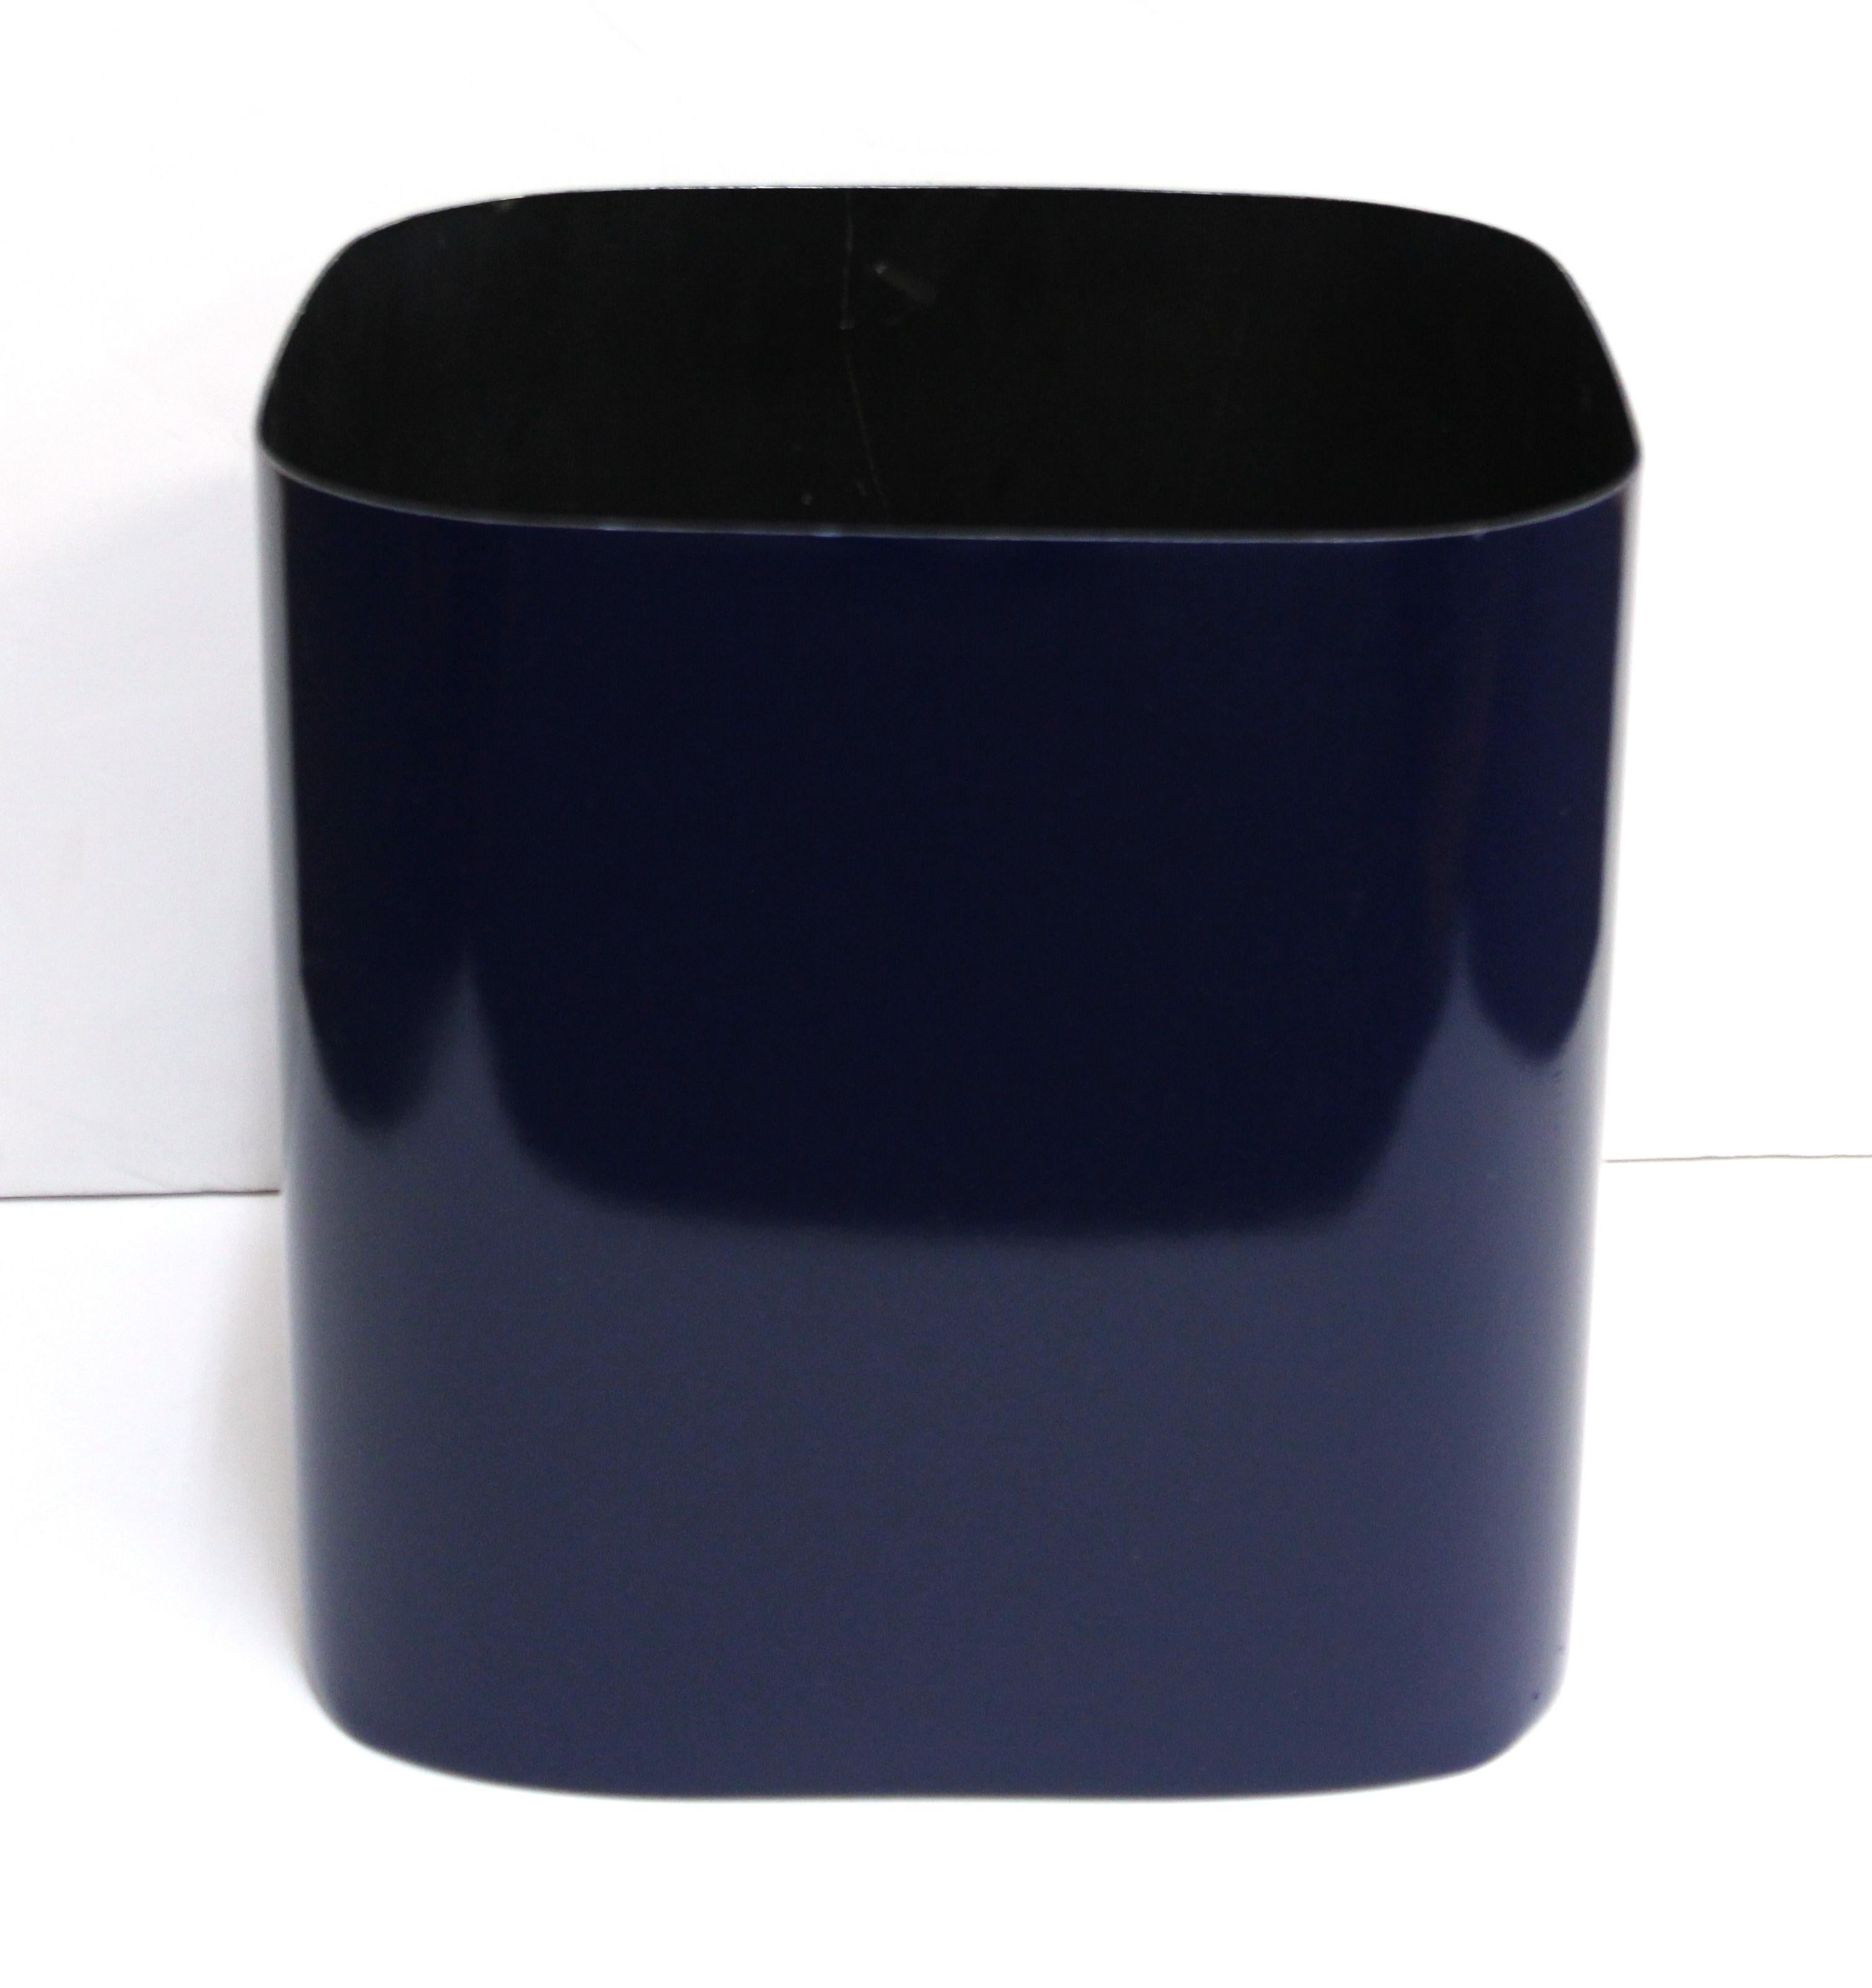 Modern planter made in lacquered metal and designed by Paul Mayen for Habitat International. The piece has rounded edges and a makers label on the bottom from Habitat international. In great vintage condition with age-appropriate wear and use.